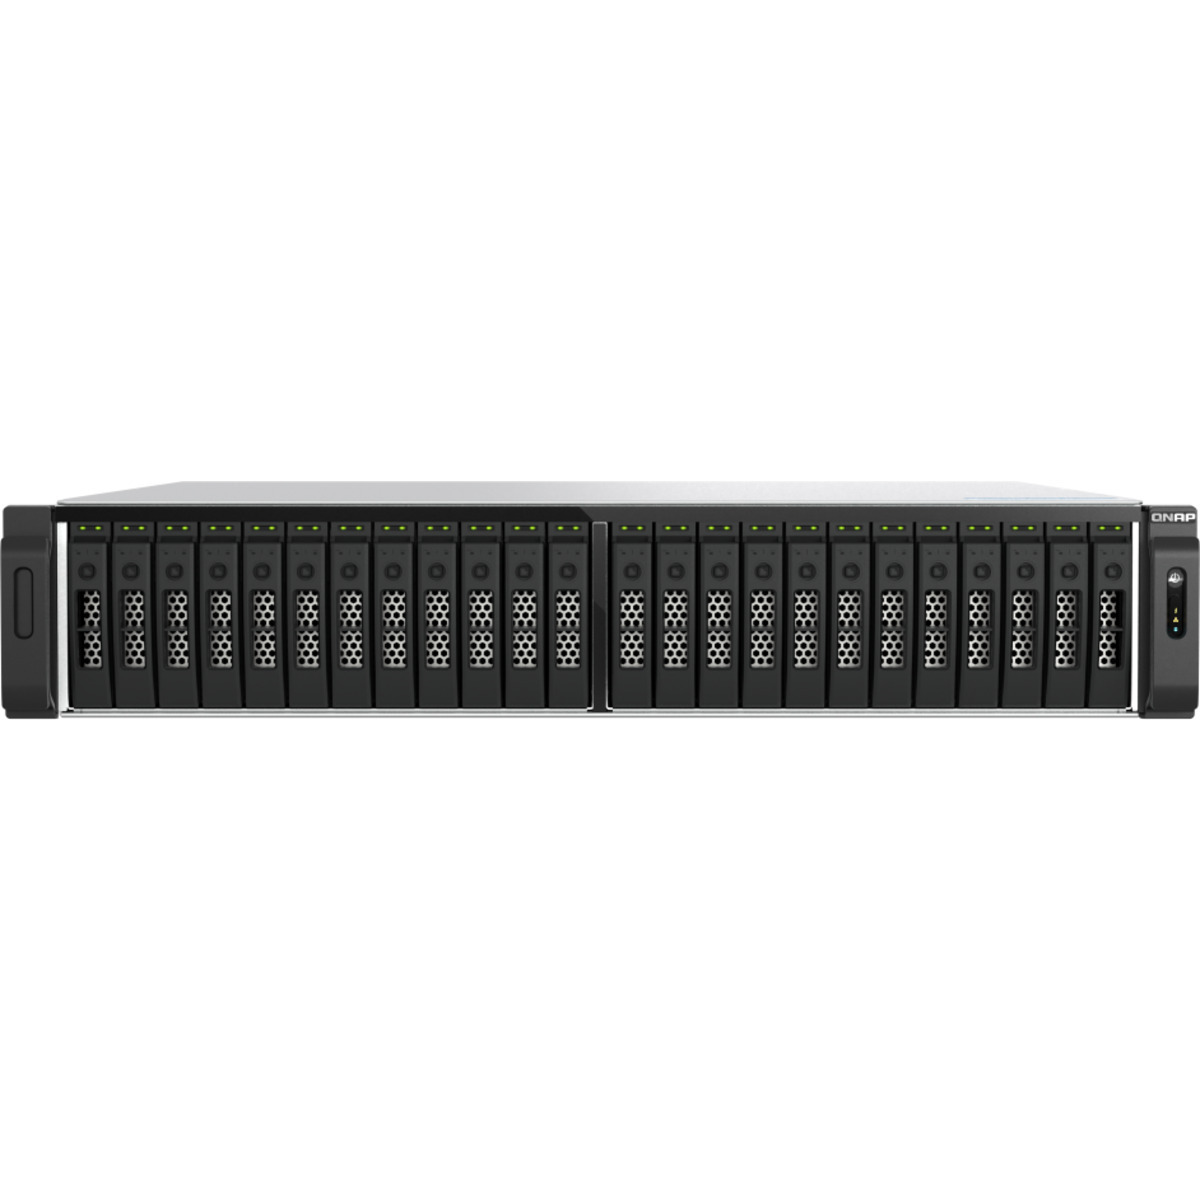 QNAP TS-h3077AFU Ryzen 5 All-Flash ZFS 112tb 30-Bay RackMount Large Business / Enterprise NAS - Network Attached Storage Device 28x4tb Crucial MX500 CT4000MX500SSD1 2.5 560/510MB/s SATA 6Gb/s SSD CONSUMER Class Drives Installed - Burn-In Tested TS-h3077AFU Ryzen 5 All-Flash ZFS